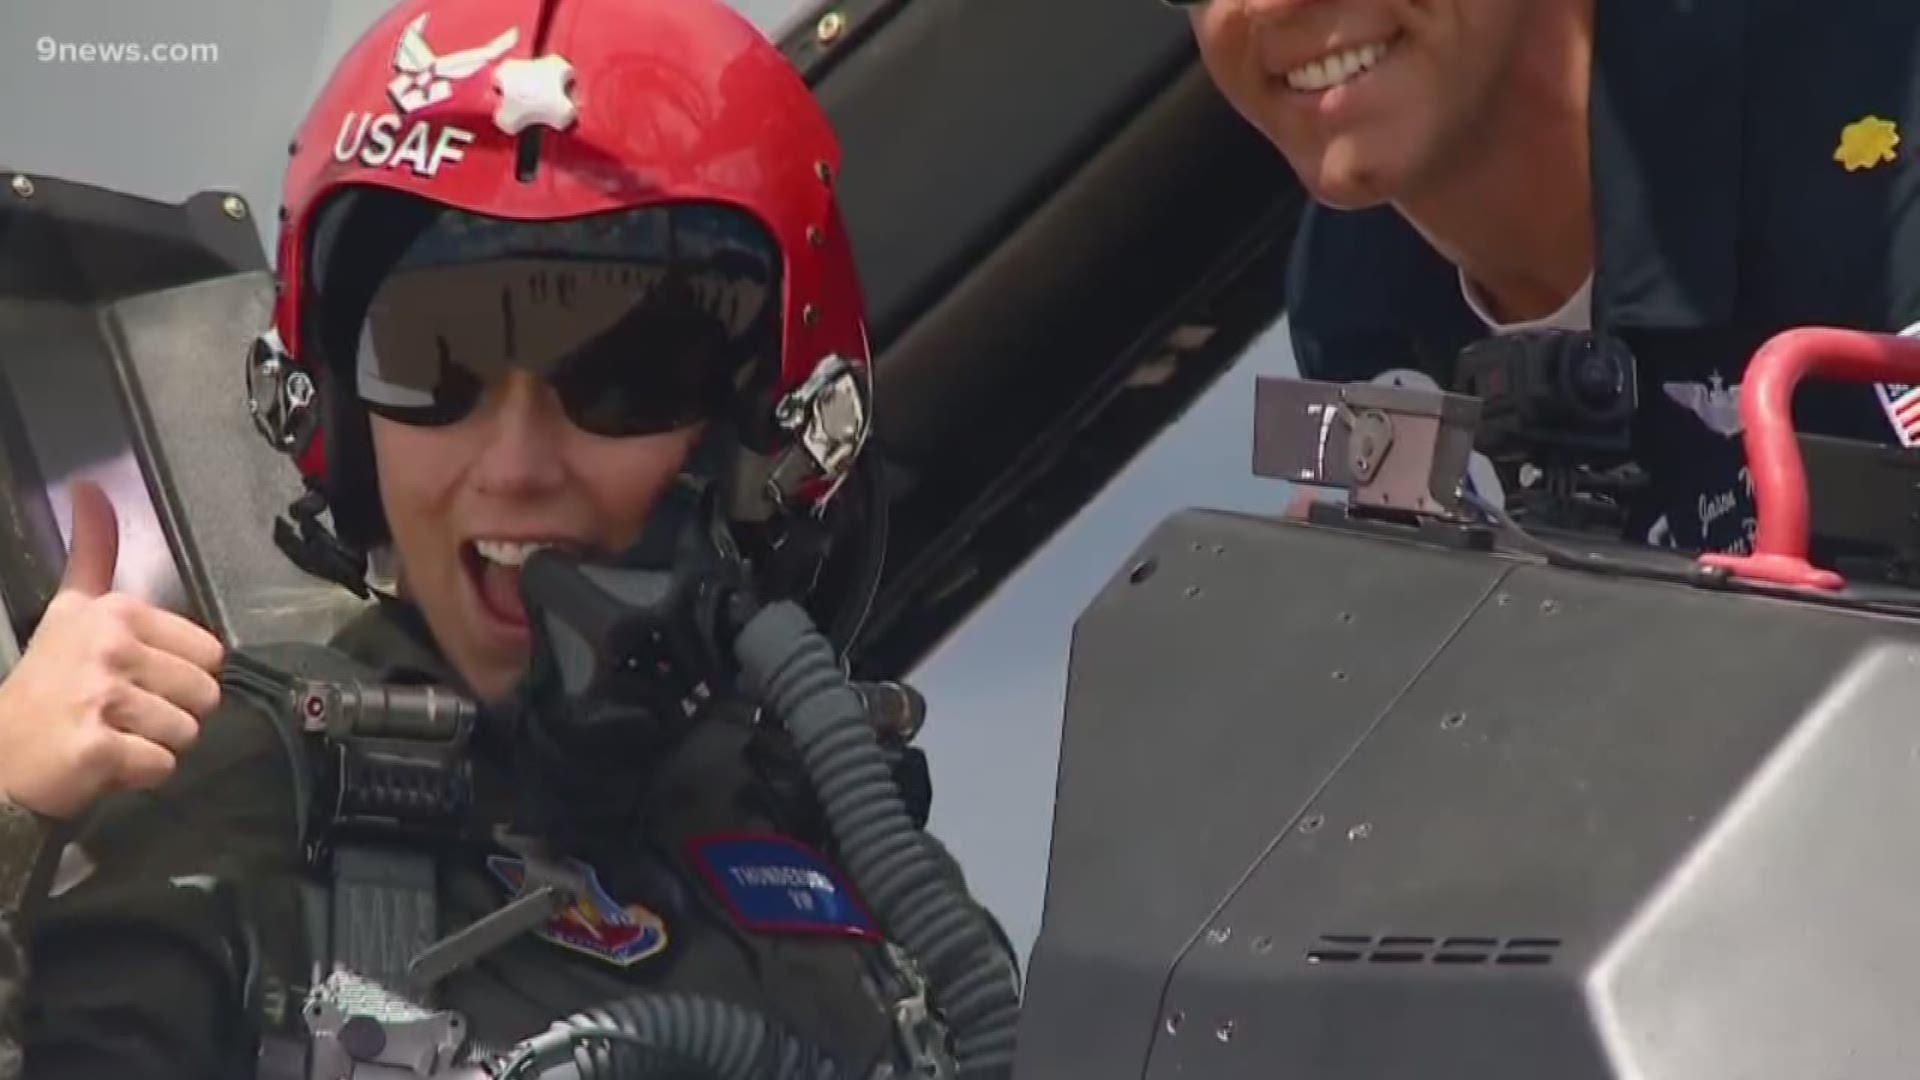 Olympic gold medalist Mikaela Shiffrin is used to going fast on skis. Tuesday, she got to go even faster in a fighter jet at Peterson Air Force Base, taking a ride in an F-16 with the Thunderbirds.